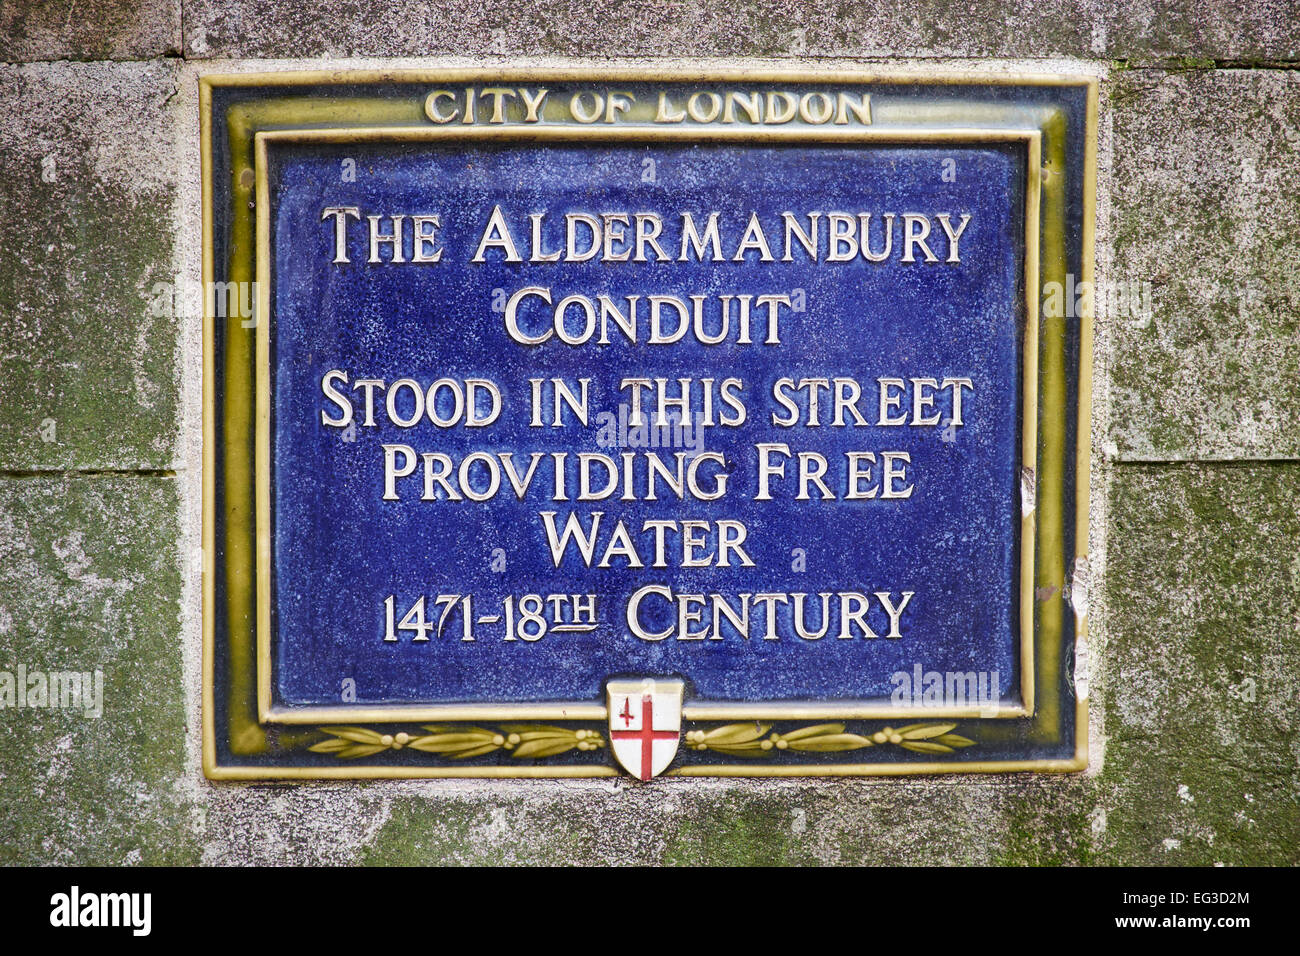 Plaque Set In The Wall For The Aldermanbury Conduit Providing Free Water Love Lane City Of London UK Stock Photo